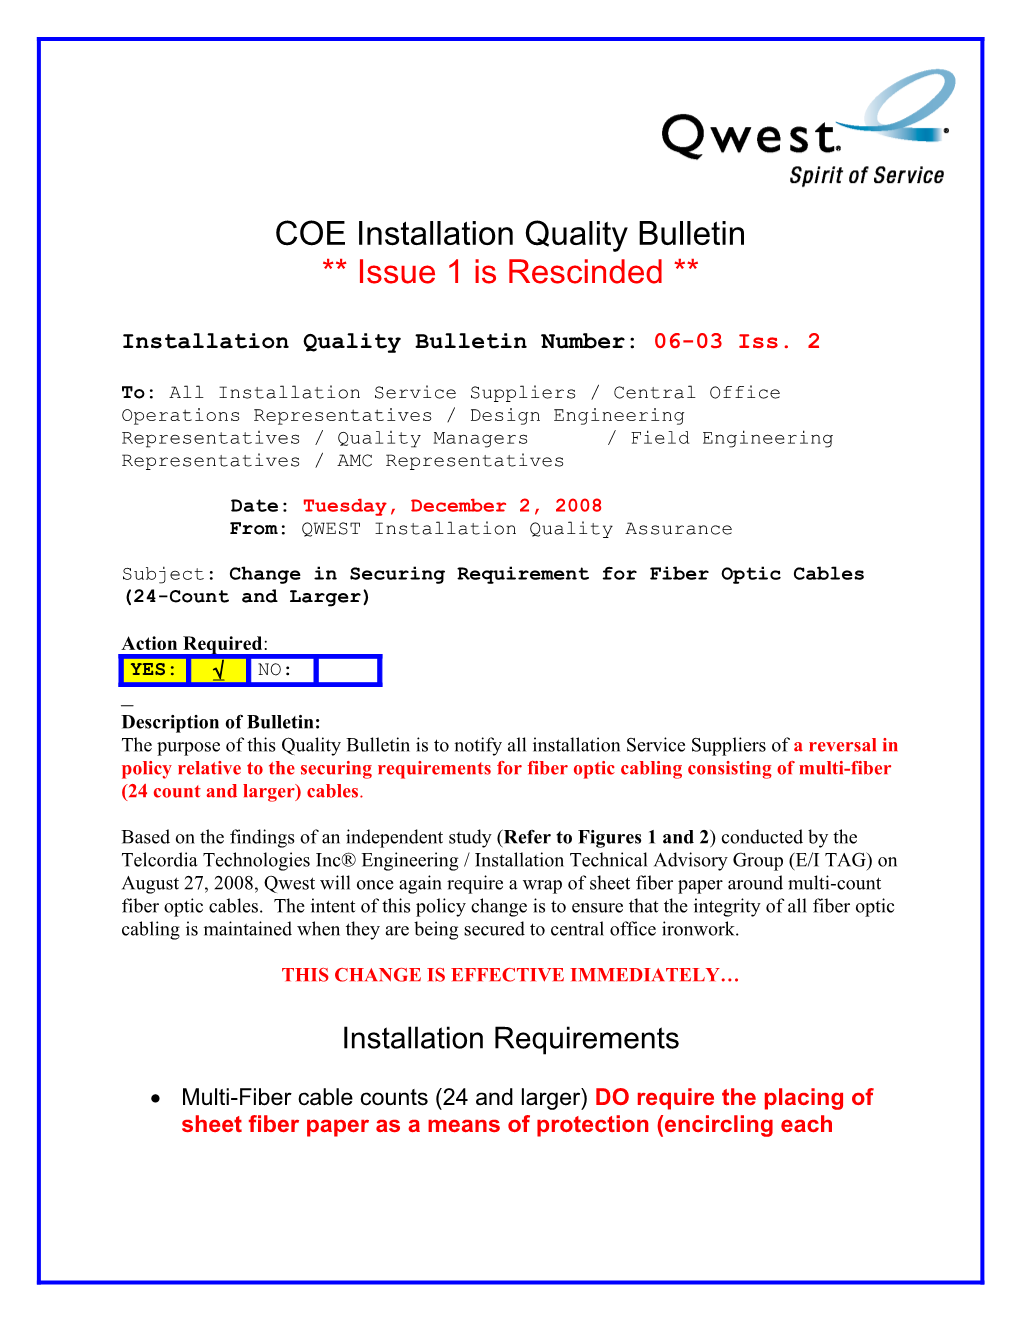 Installation Quality Bulletin Number: 06-03Iss. 2